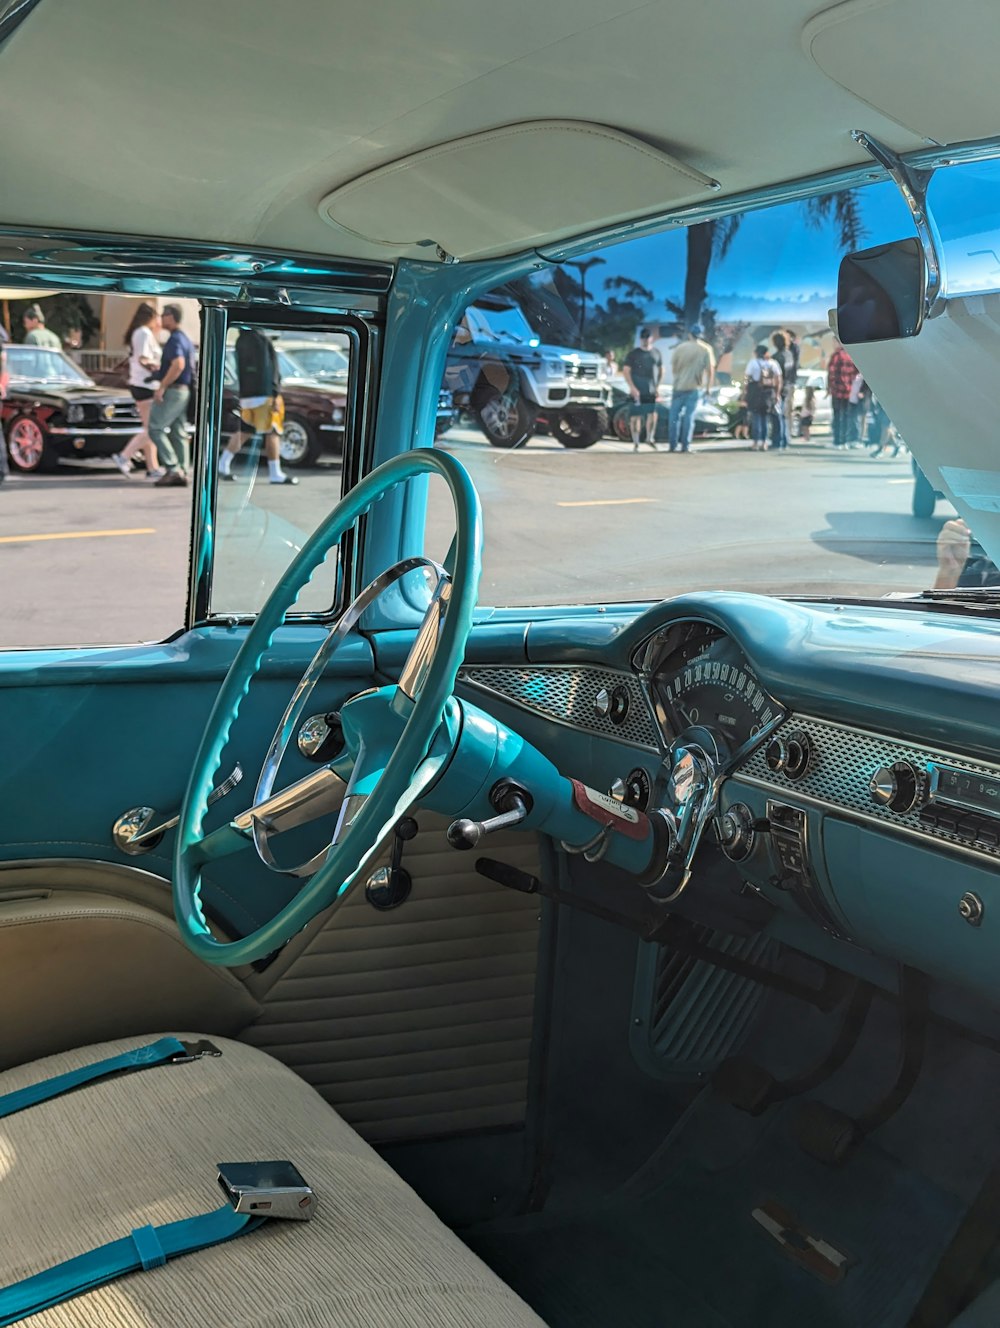 the interior of a car with a blue dash board